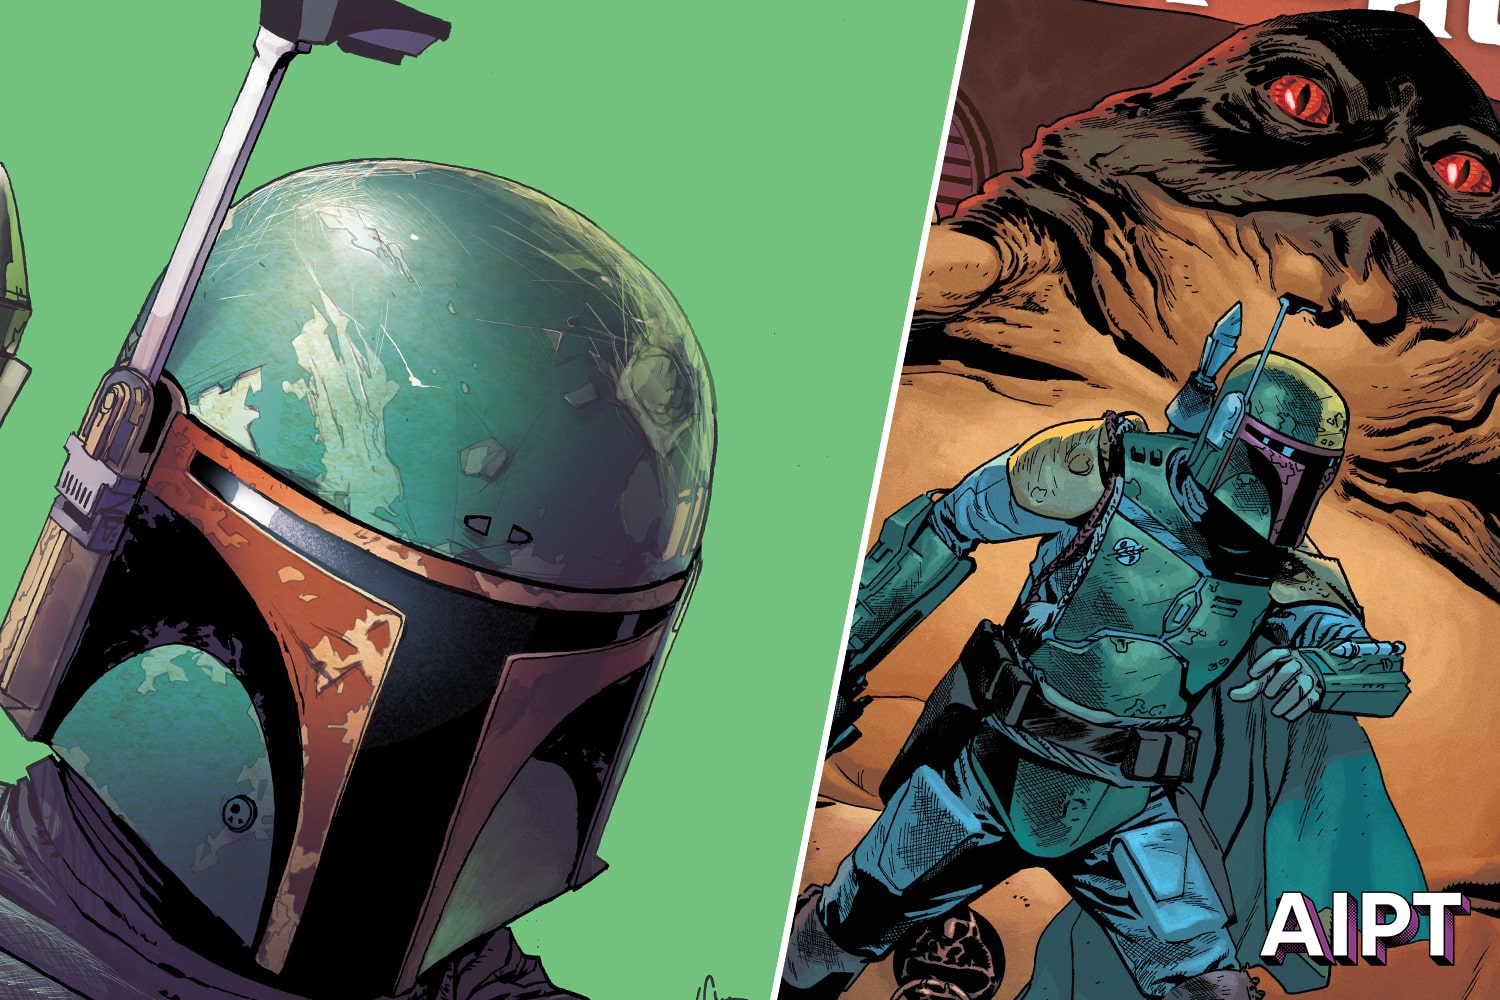 Marvel launching 'Jabba the Hutt' one-shot for 'War of the Bounty Hunters' event